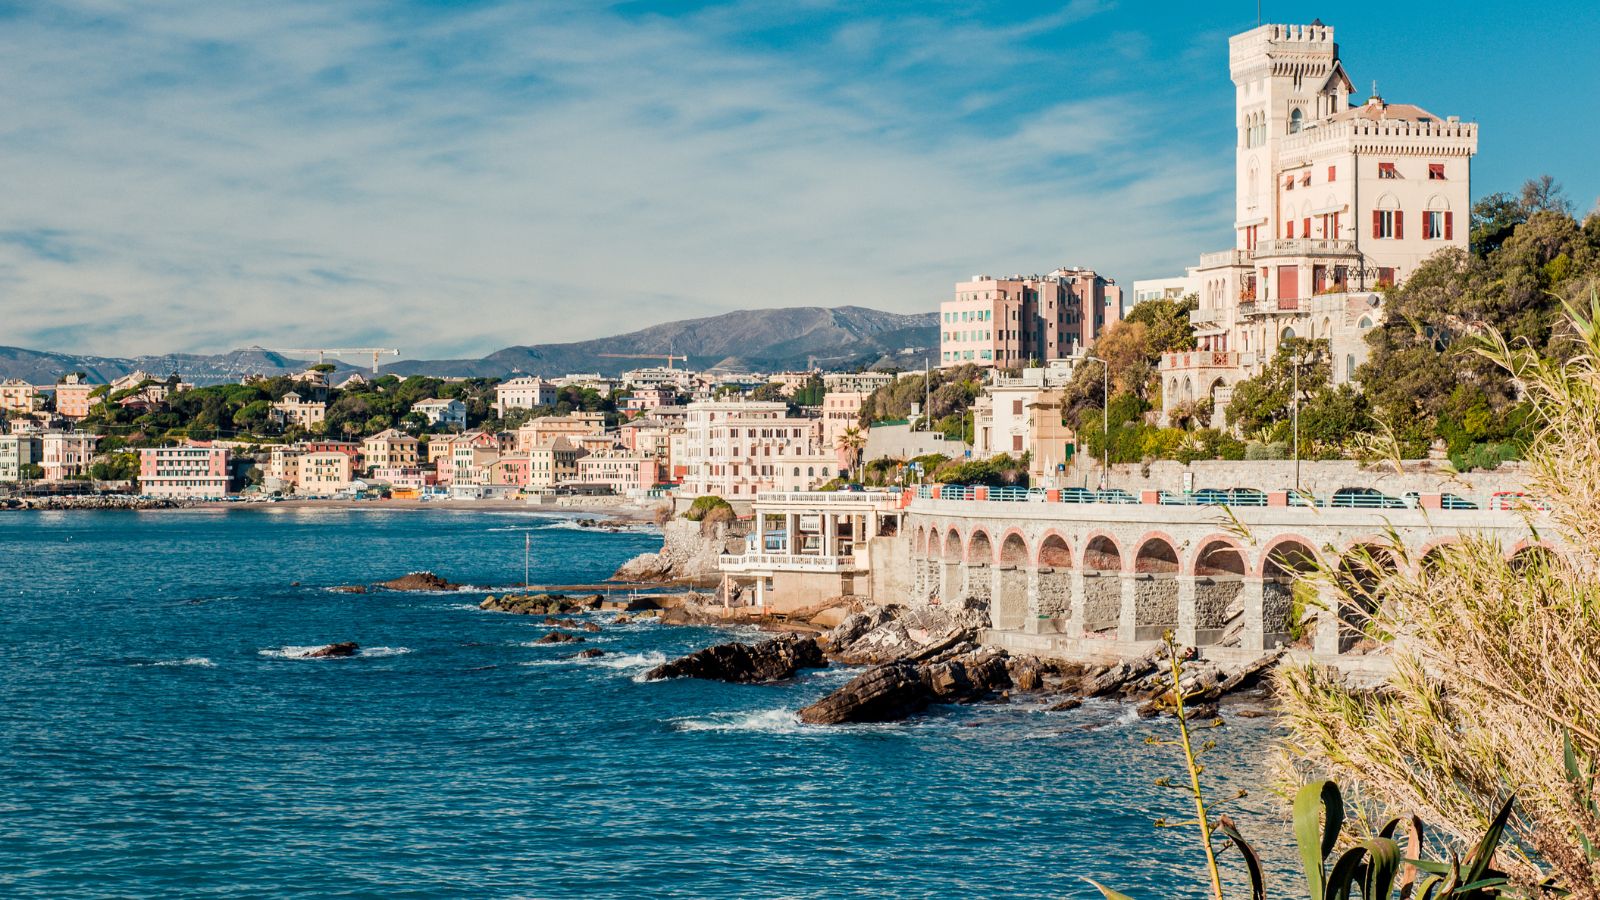 <p>Genoa has plenty of places to visit, such as the historic port, the aquarium, and the maritime museum. You can also take a stroll through the old town and see the famous palaces along Via Garibaldi. You may also want to take a day trip to the beautiful coastal village of Portofino.</p>